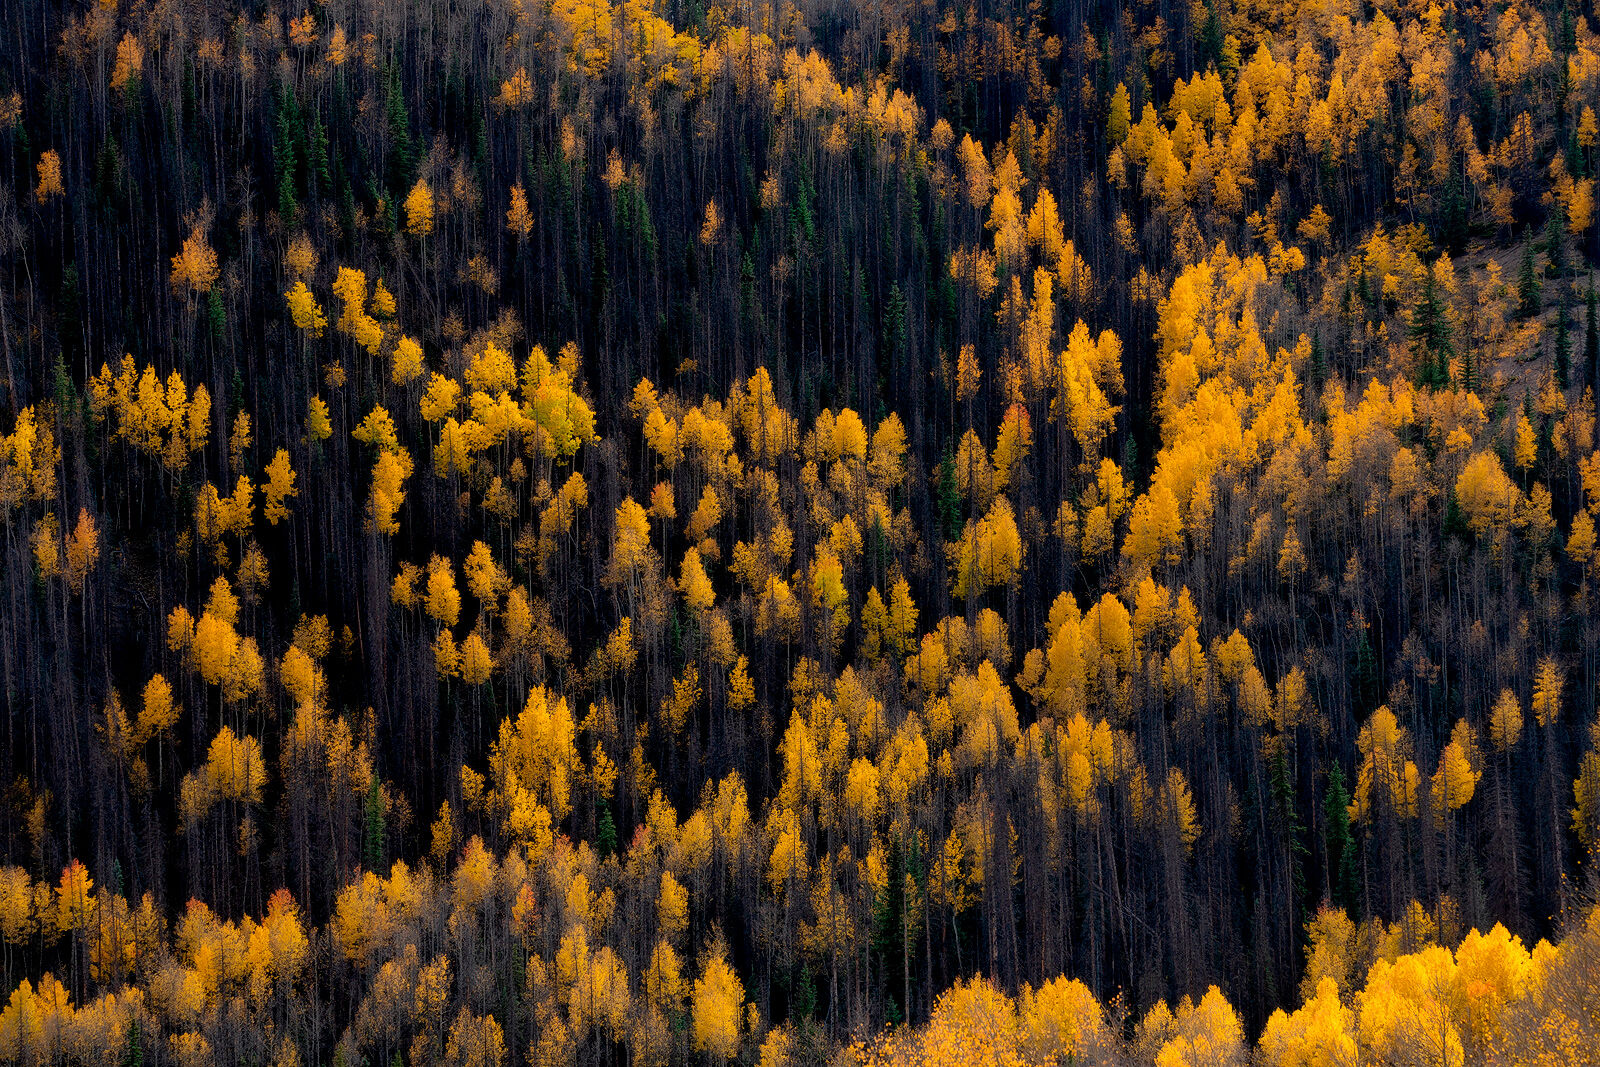 Aerial photo of yellow-leaved aspen trees that appear to flow down the hillside.